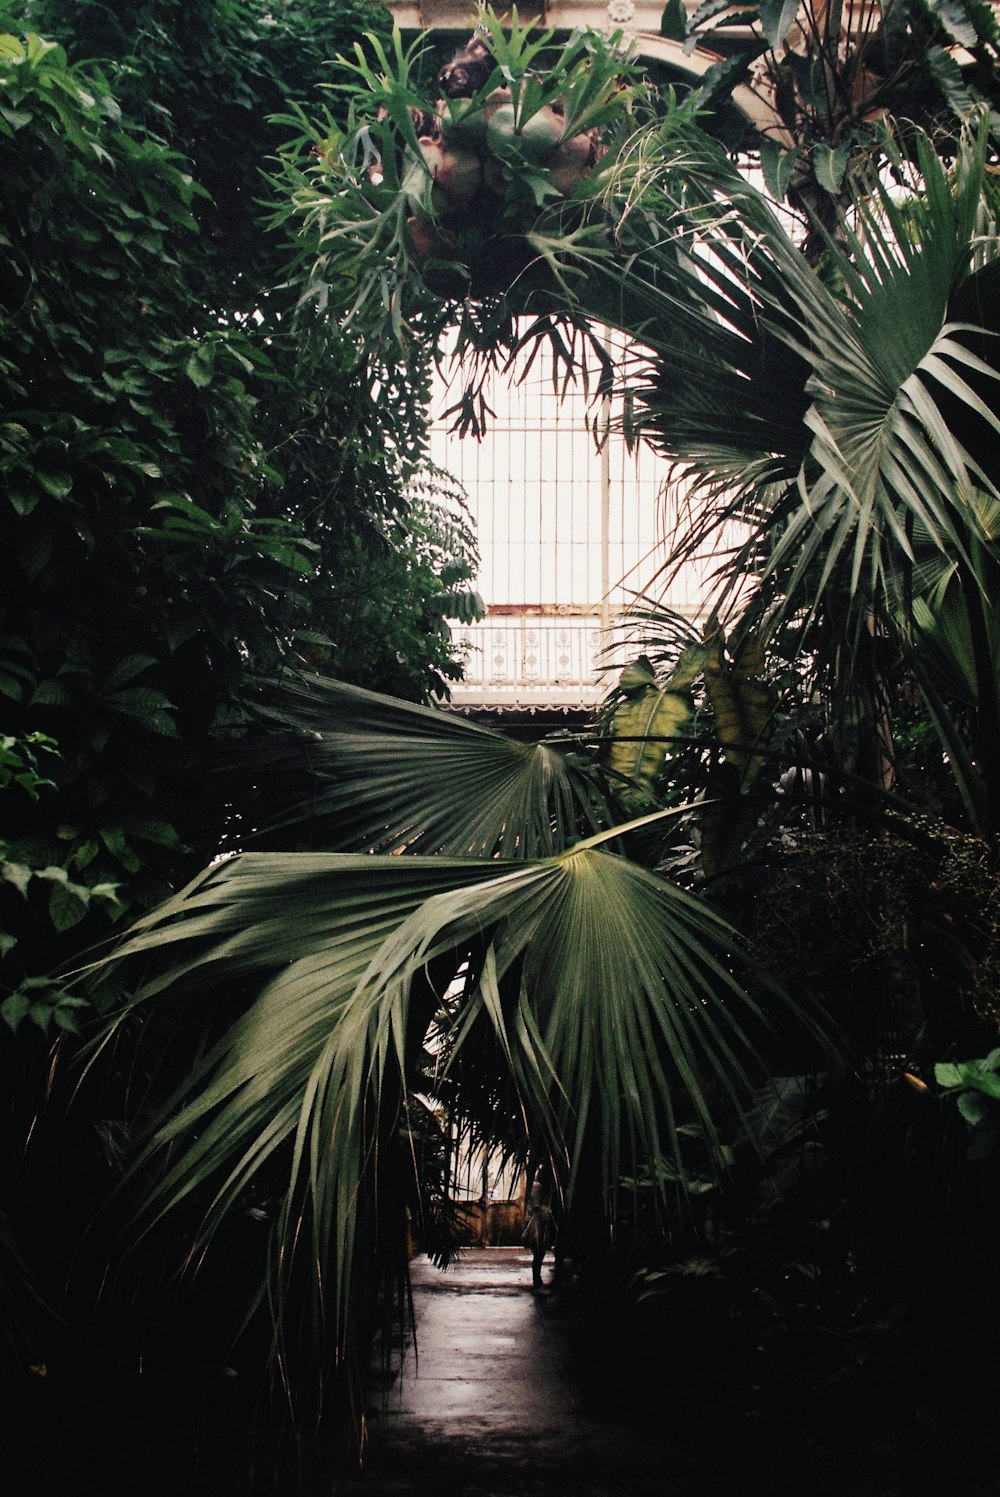 a view of the inside of a tropical greenhouse